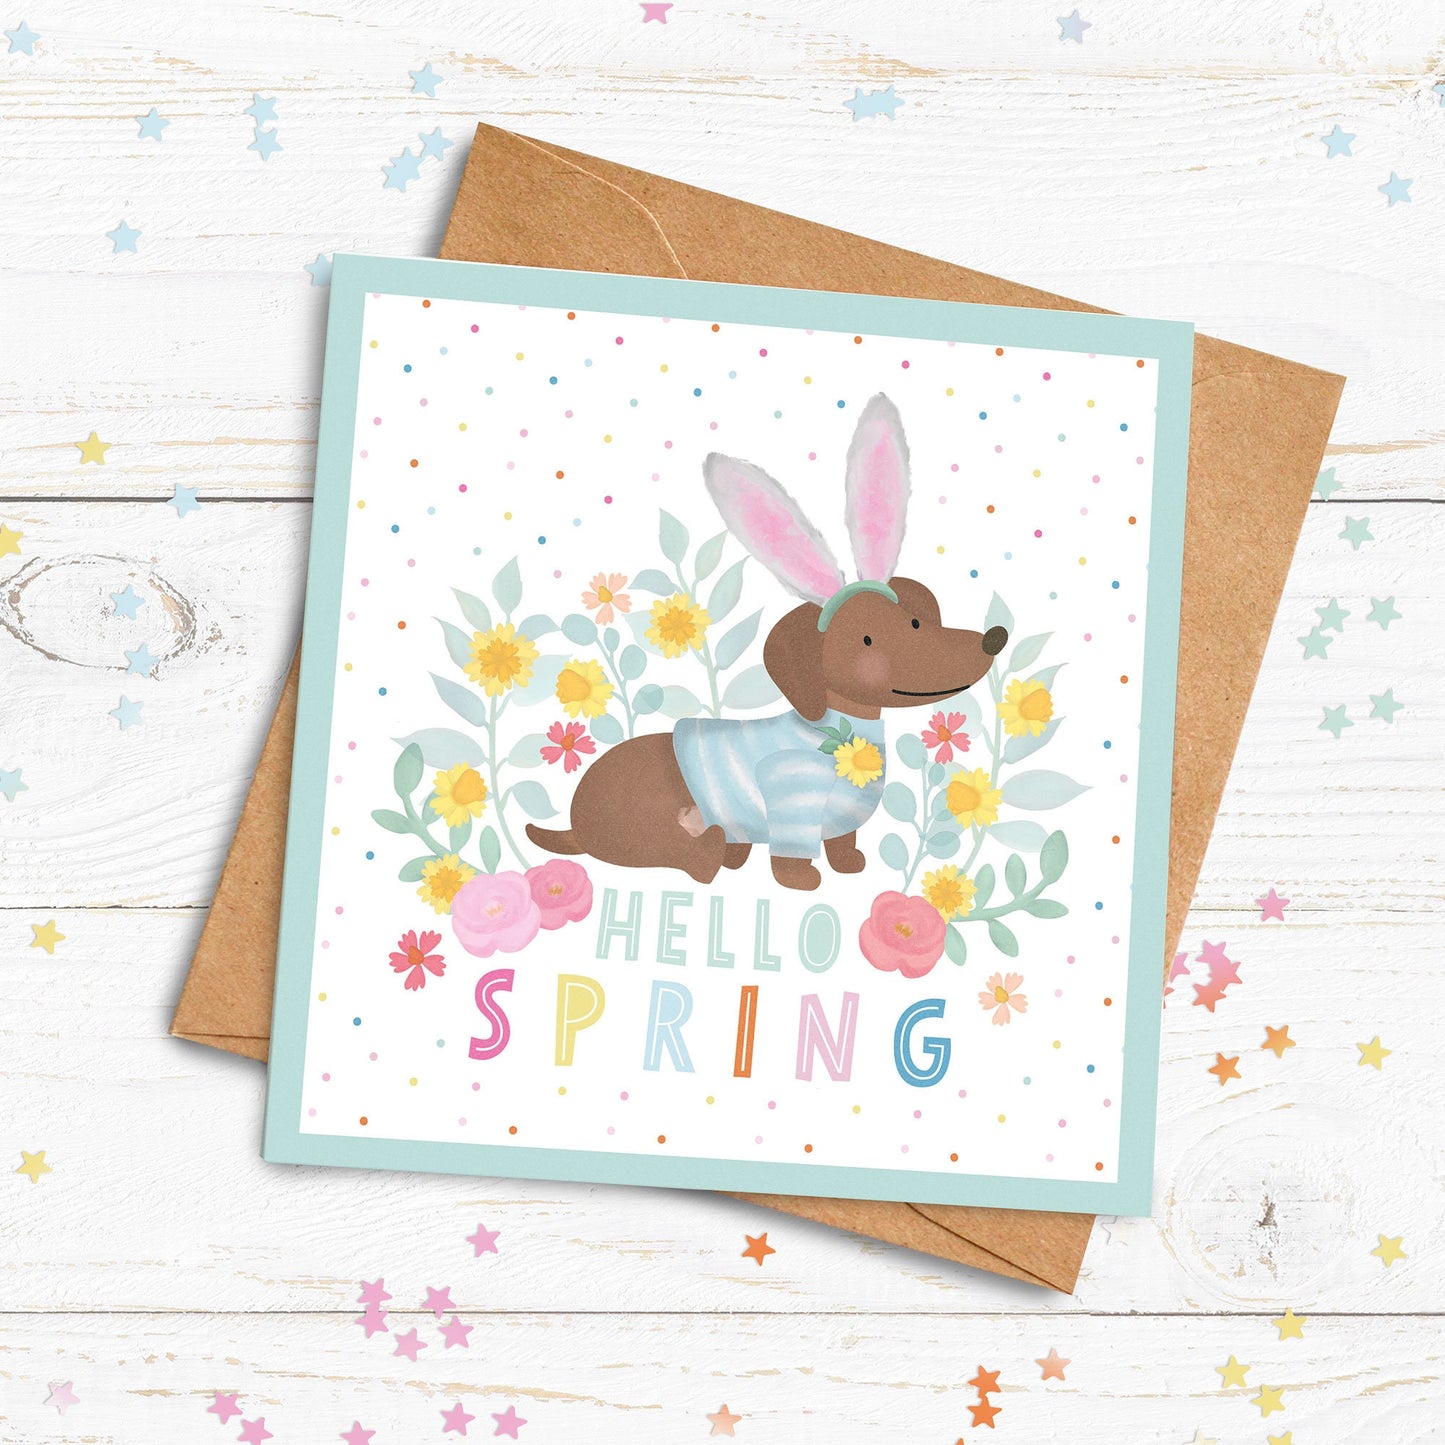 Hello Spring Personalised Card. Cute Sausage Dog Card. Cute Easter Card. Personalised Spring Time Card. Spring Birthday. Send Direct Option.